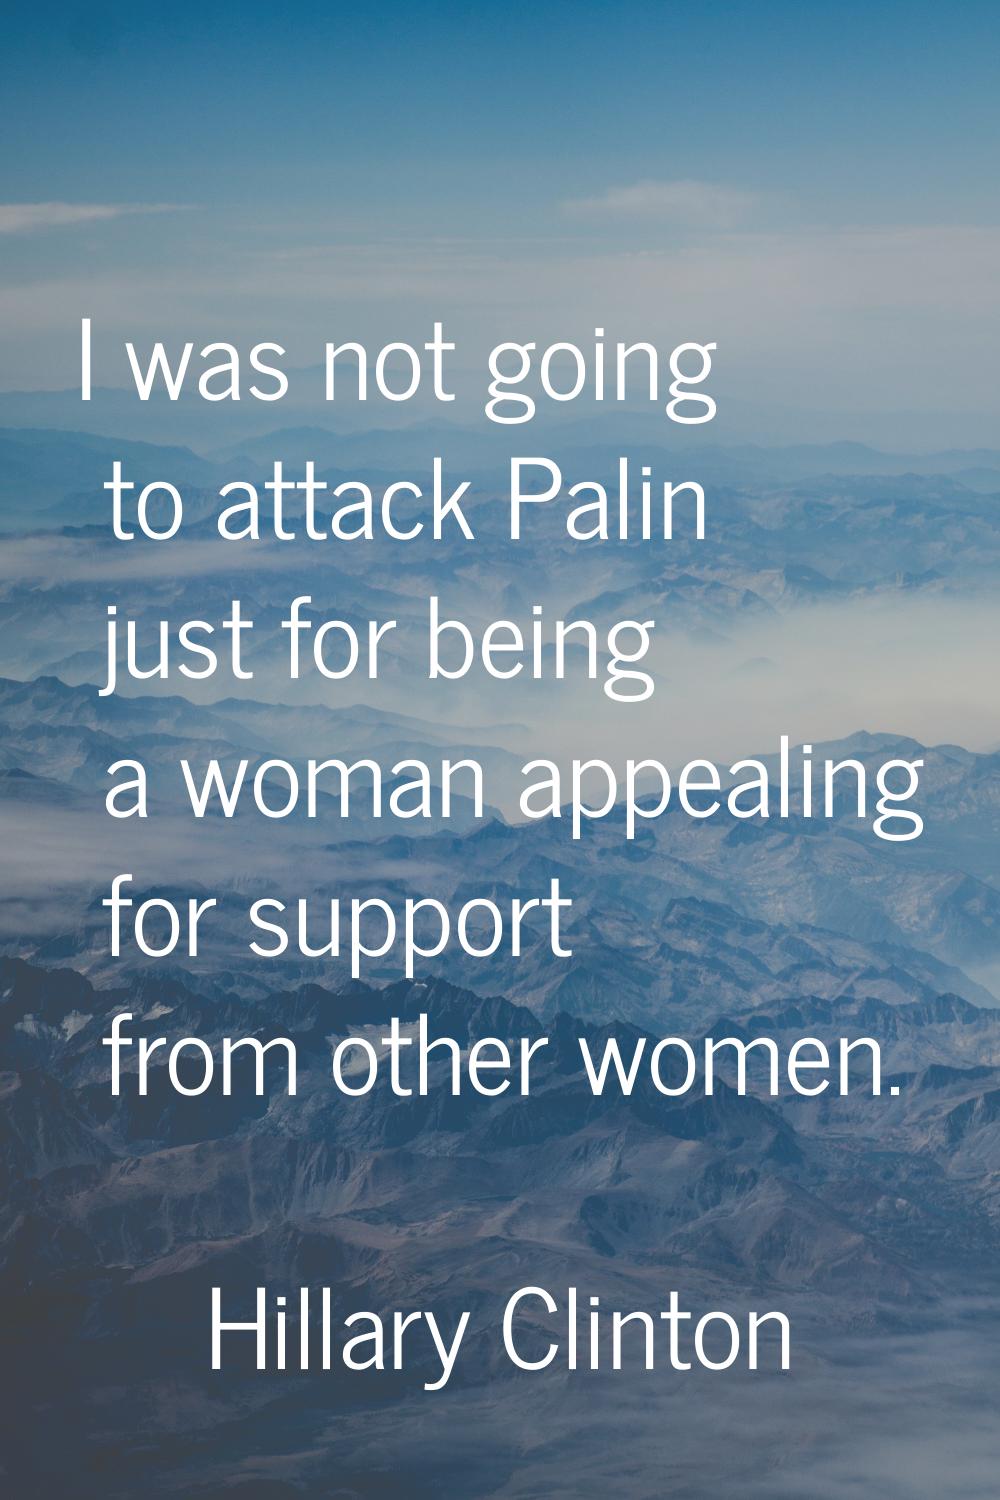 I was not going to attack Palin just for being a woman appealing for support from other women.